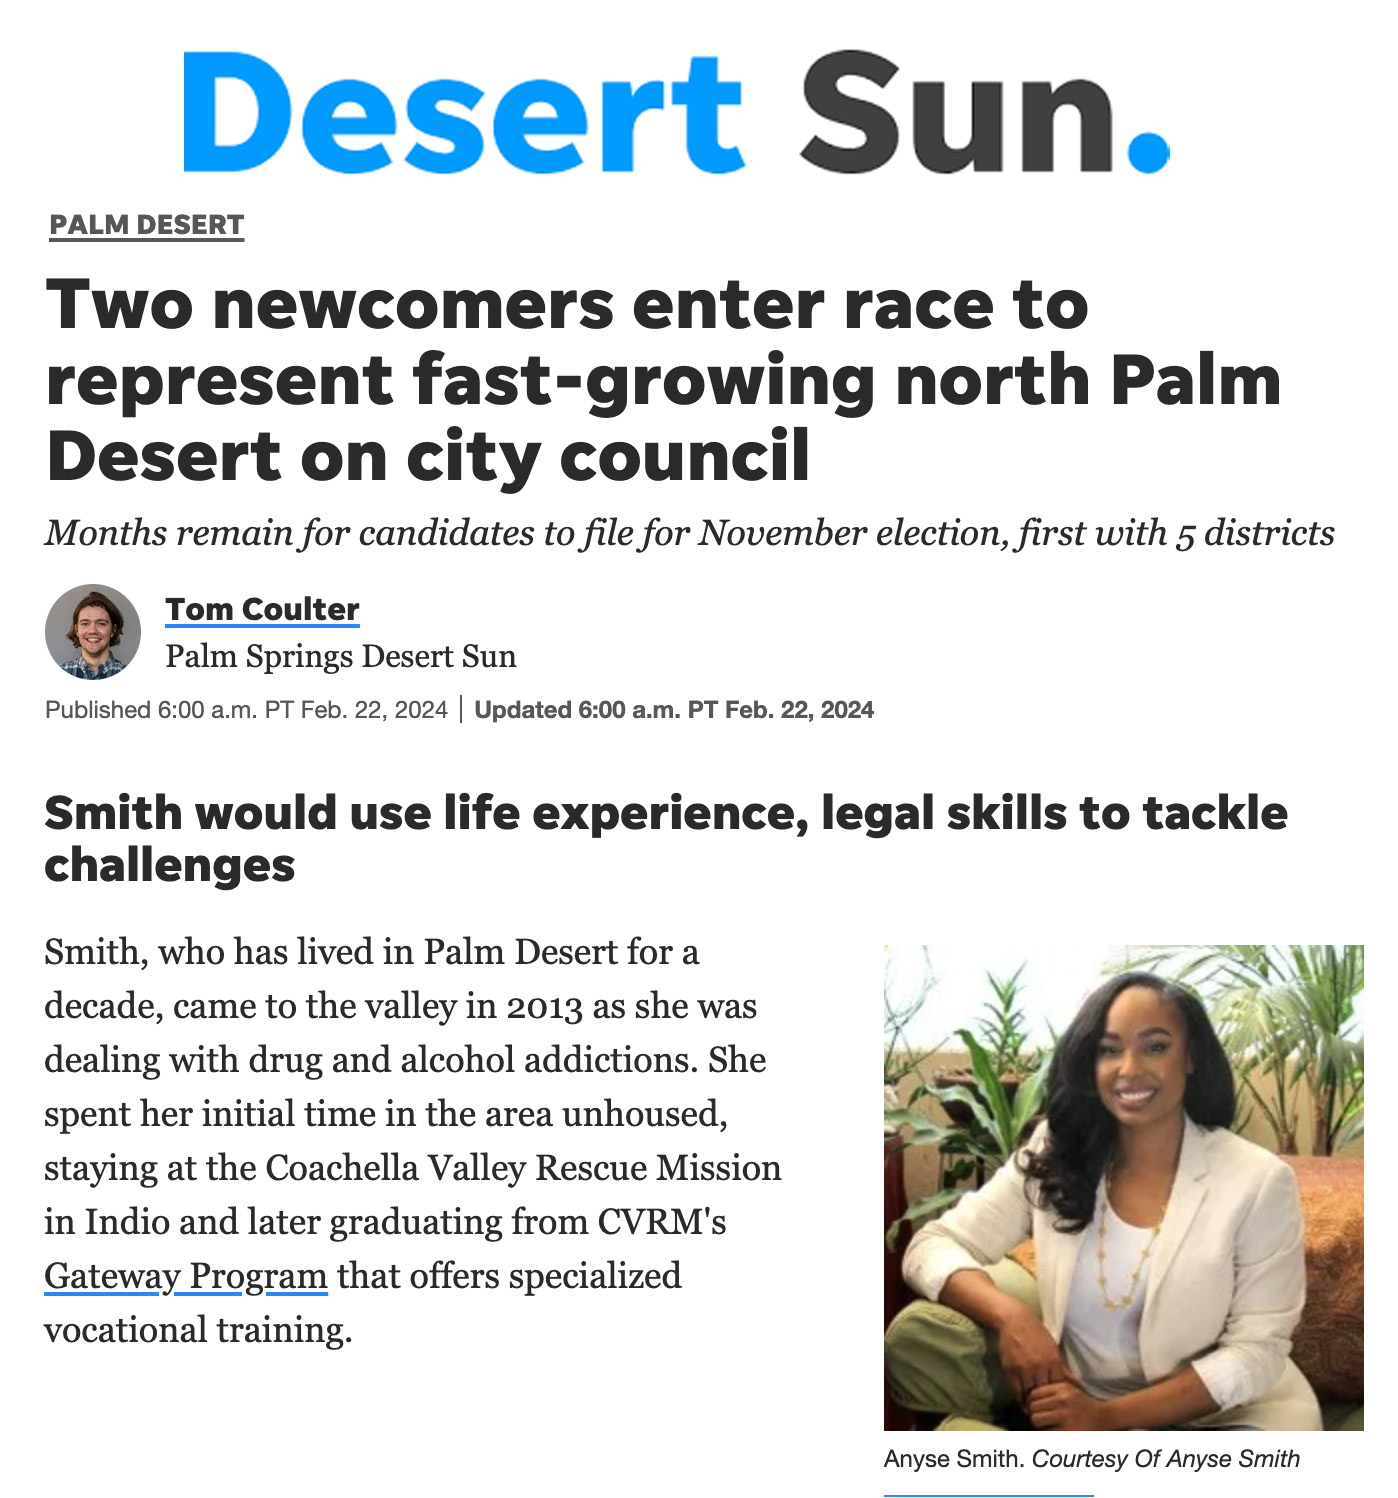 Two newcomers enter race to represent fast-growing north Palm Desert on city council